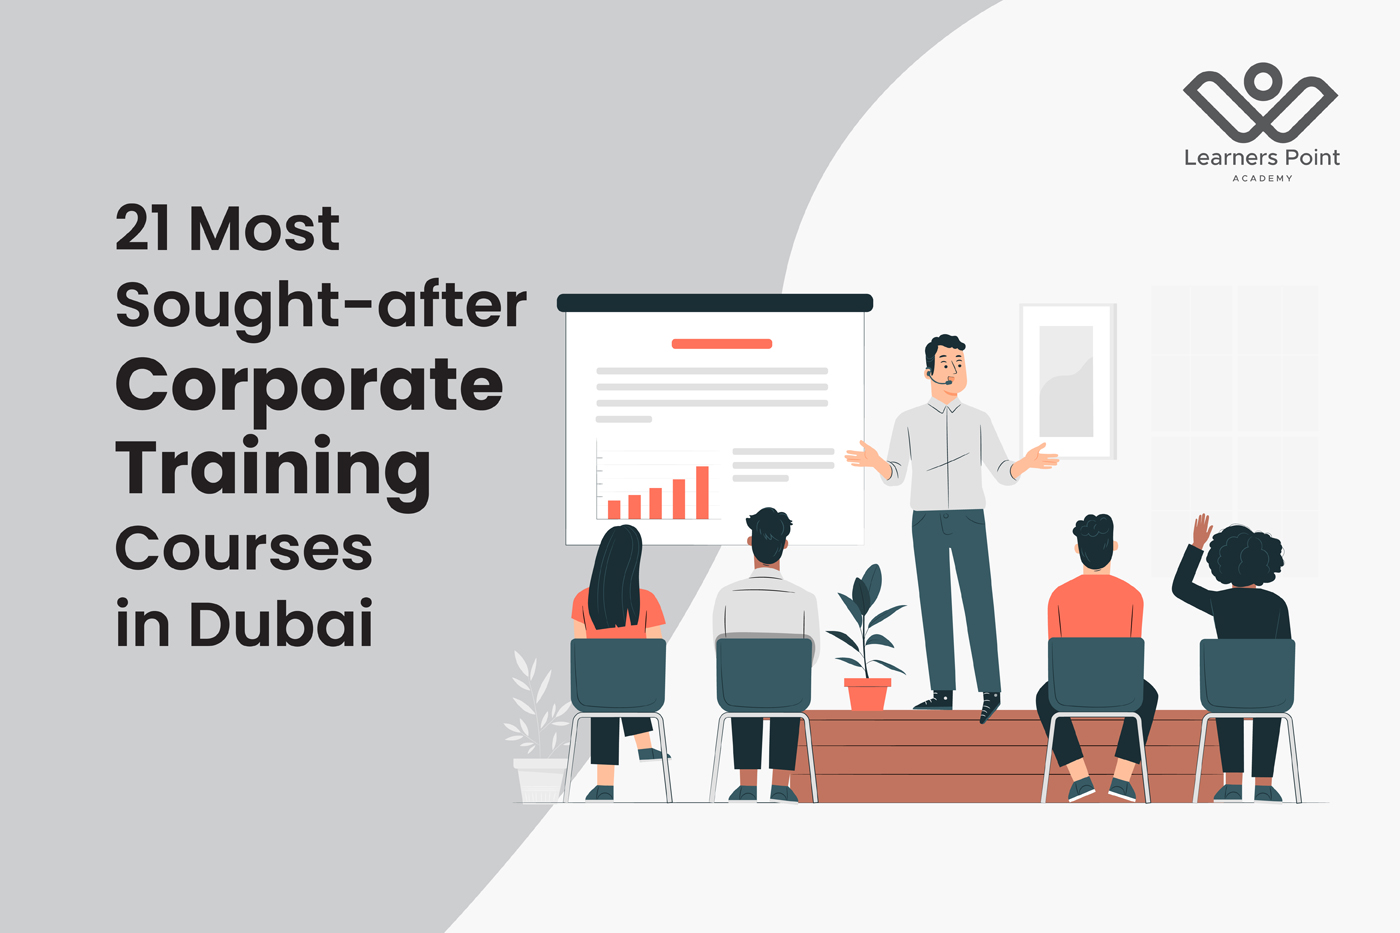 21 Most Sought-after Corporate Training Courses in Dubai